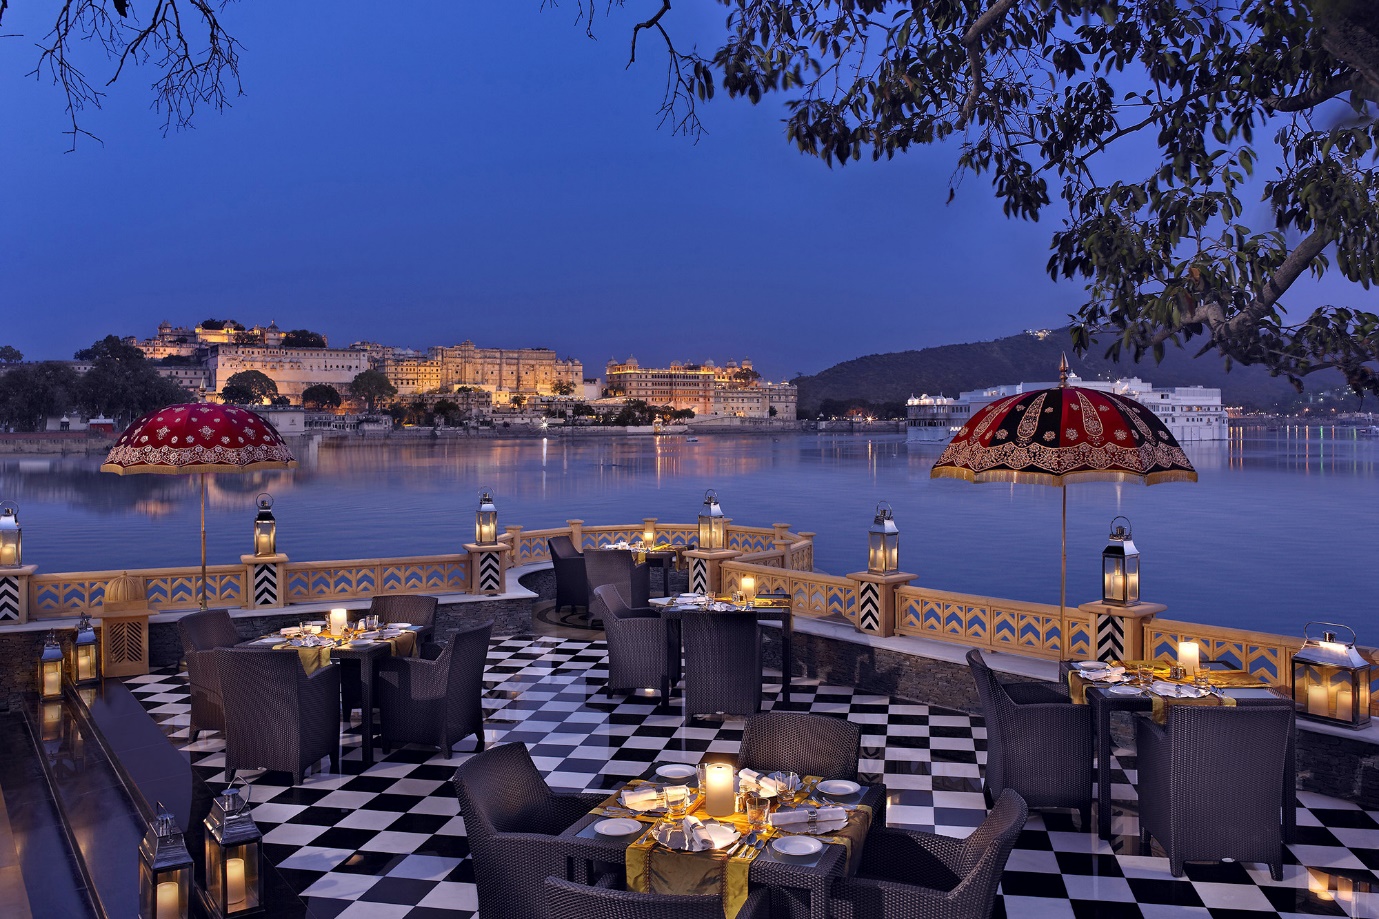 Outside dining area of the Leela Palace in Udaipur | Wedifys